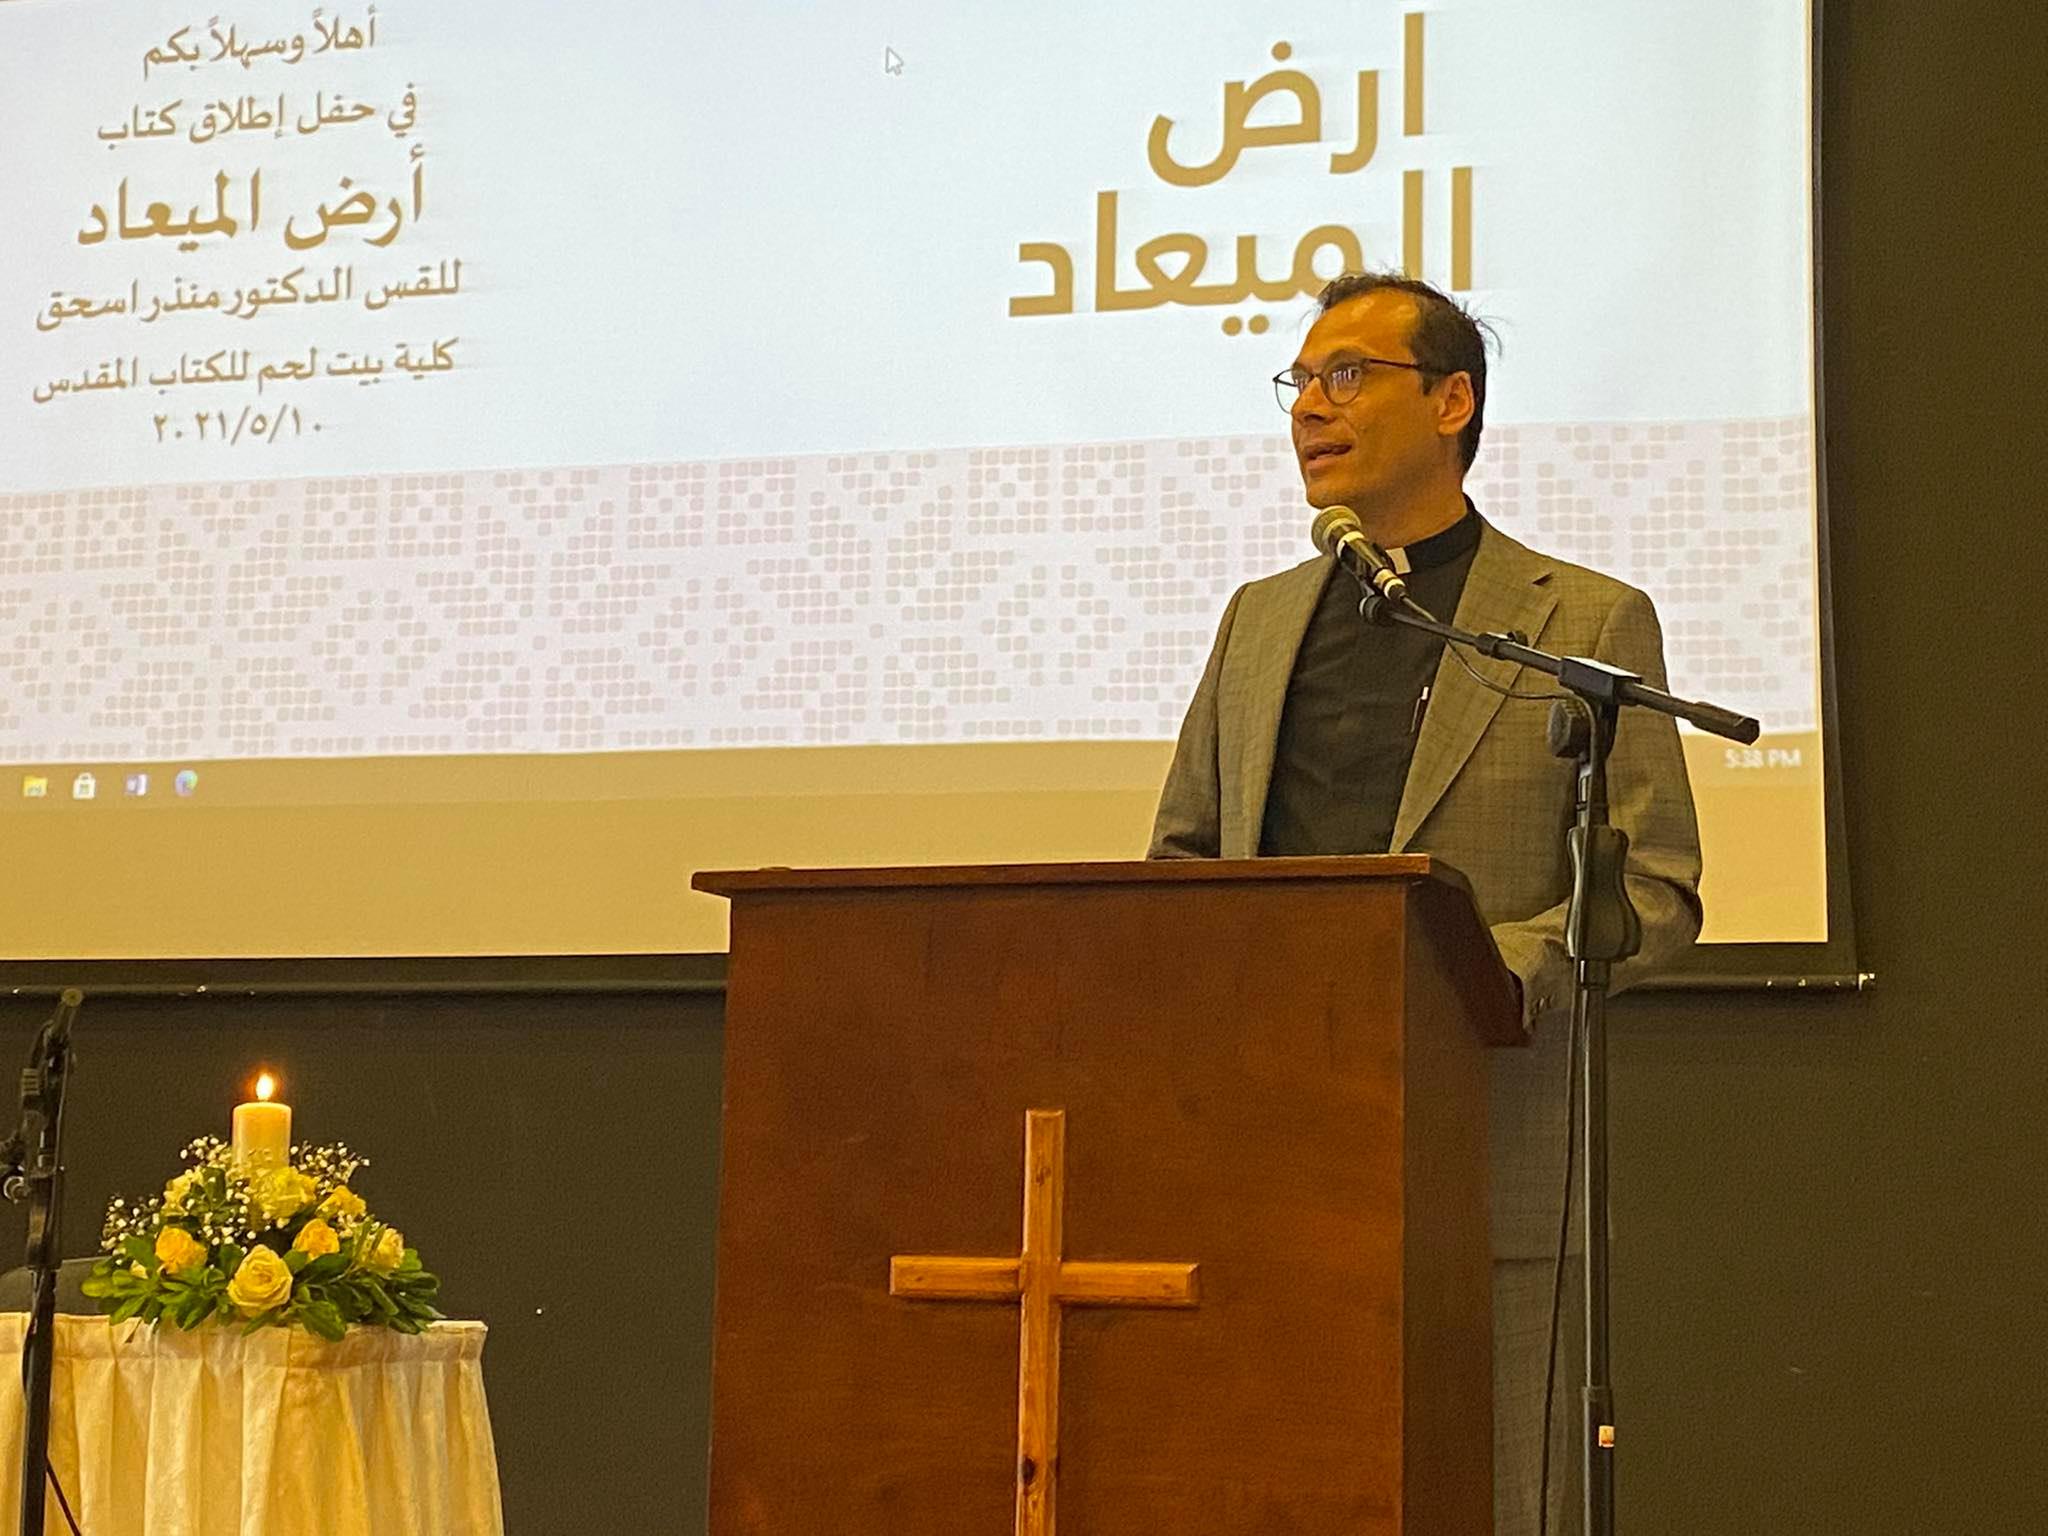 Rev. Dr. Munther Isaac‘s Speech at the Launch Event of His Book “The Promised Land” in Arabic